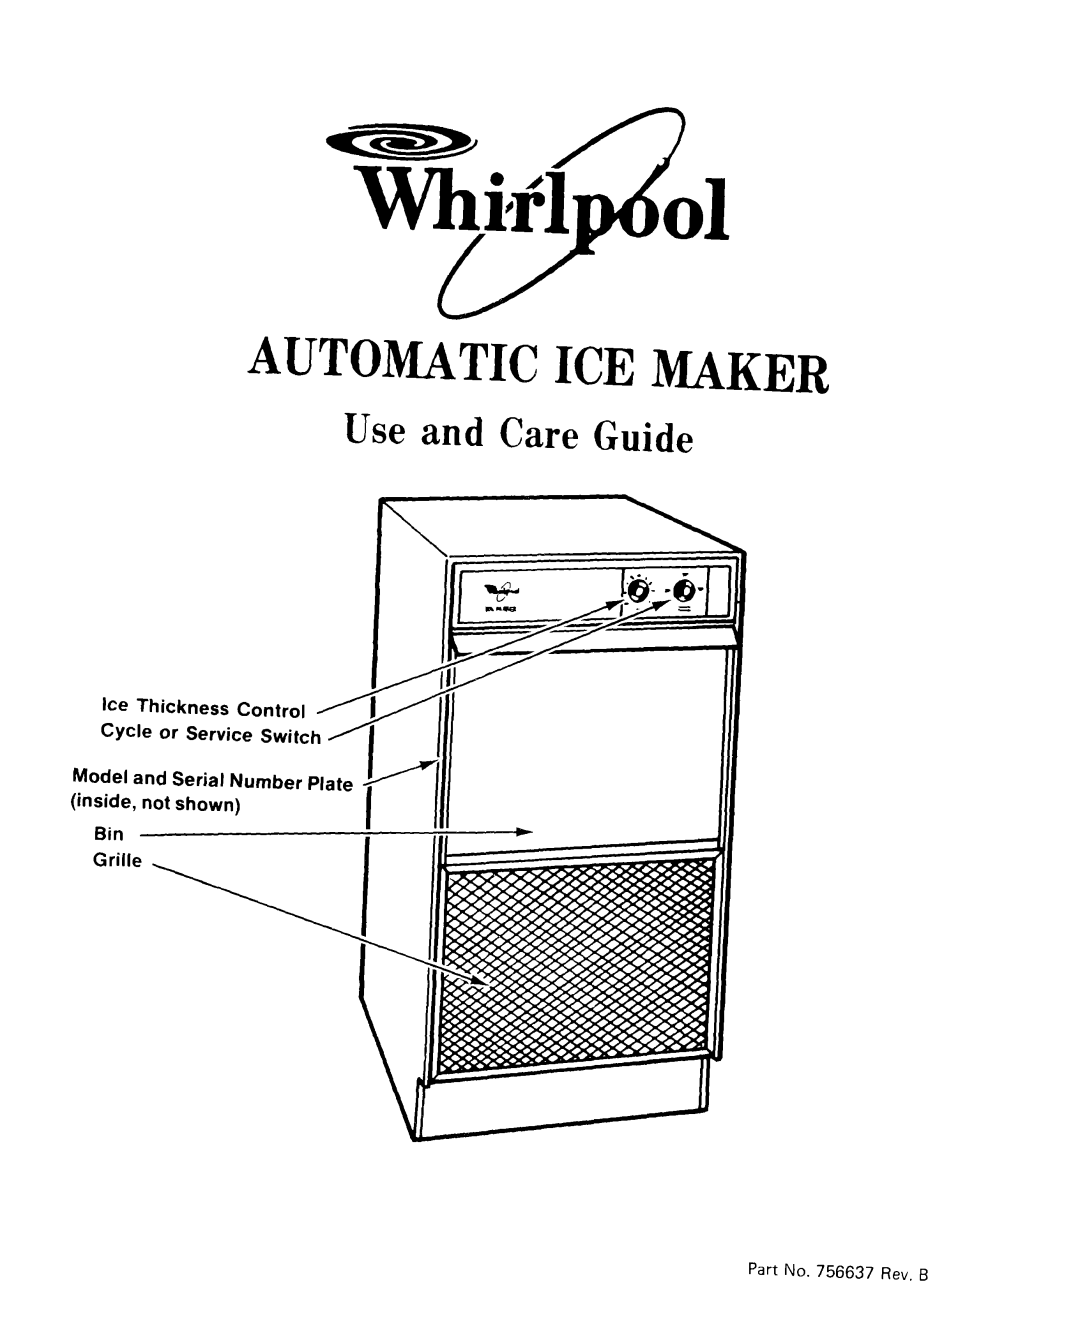 Whirlpool EHC511 manual Automatic Ice Maker, Use and Care Guide, Ice Thickness Control H Cycle or Service Switch 